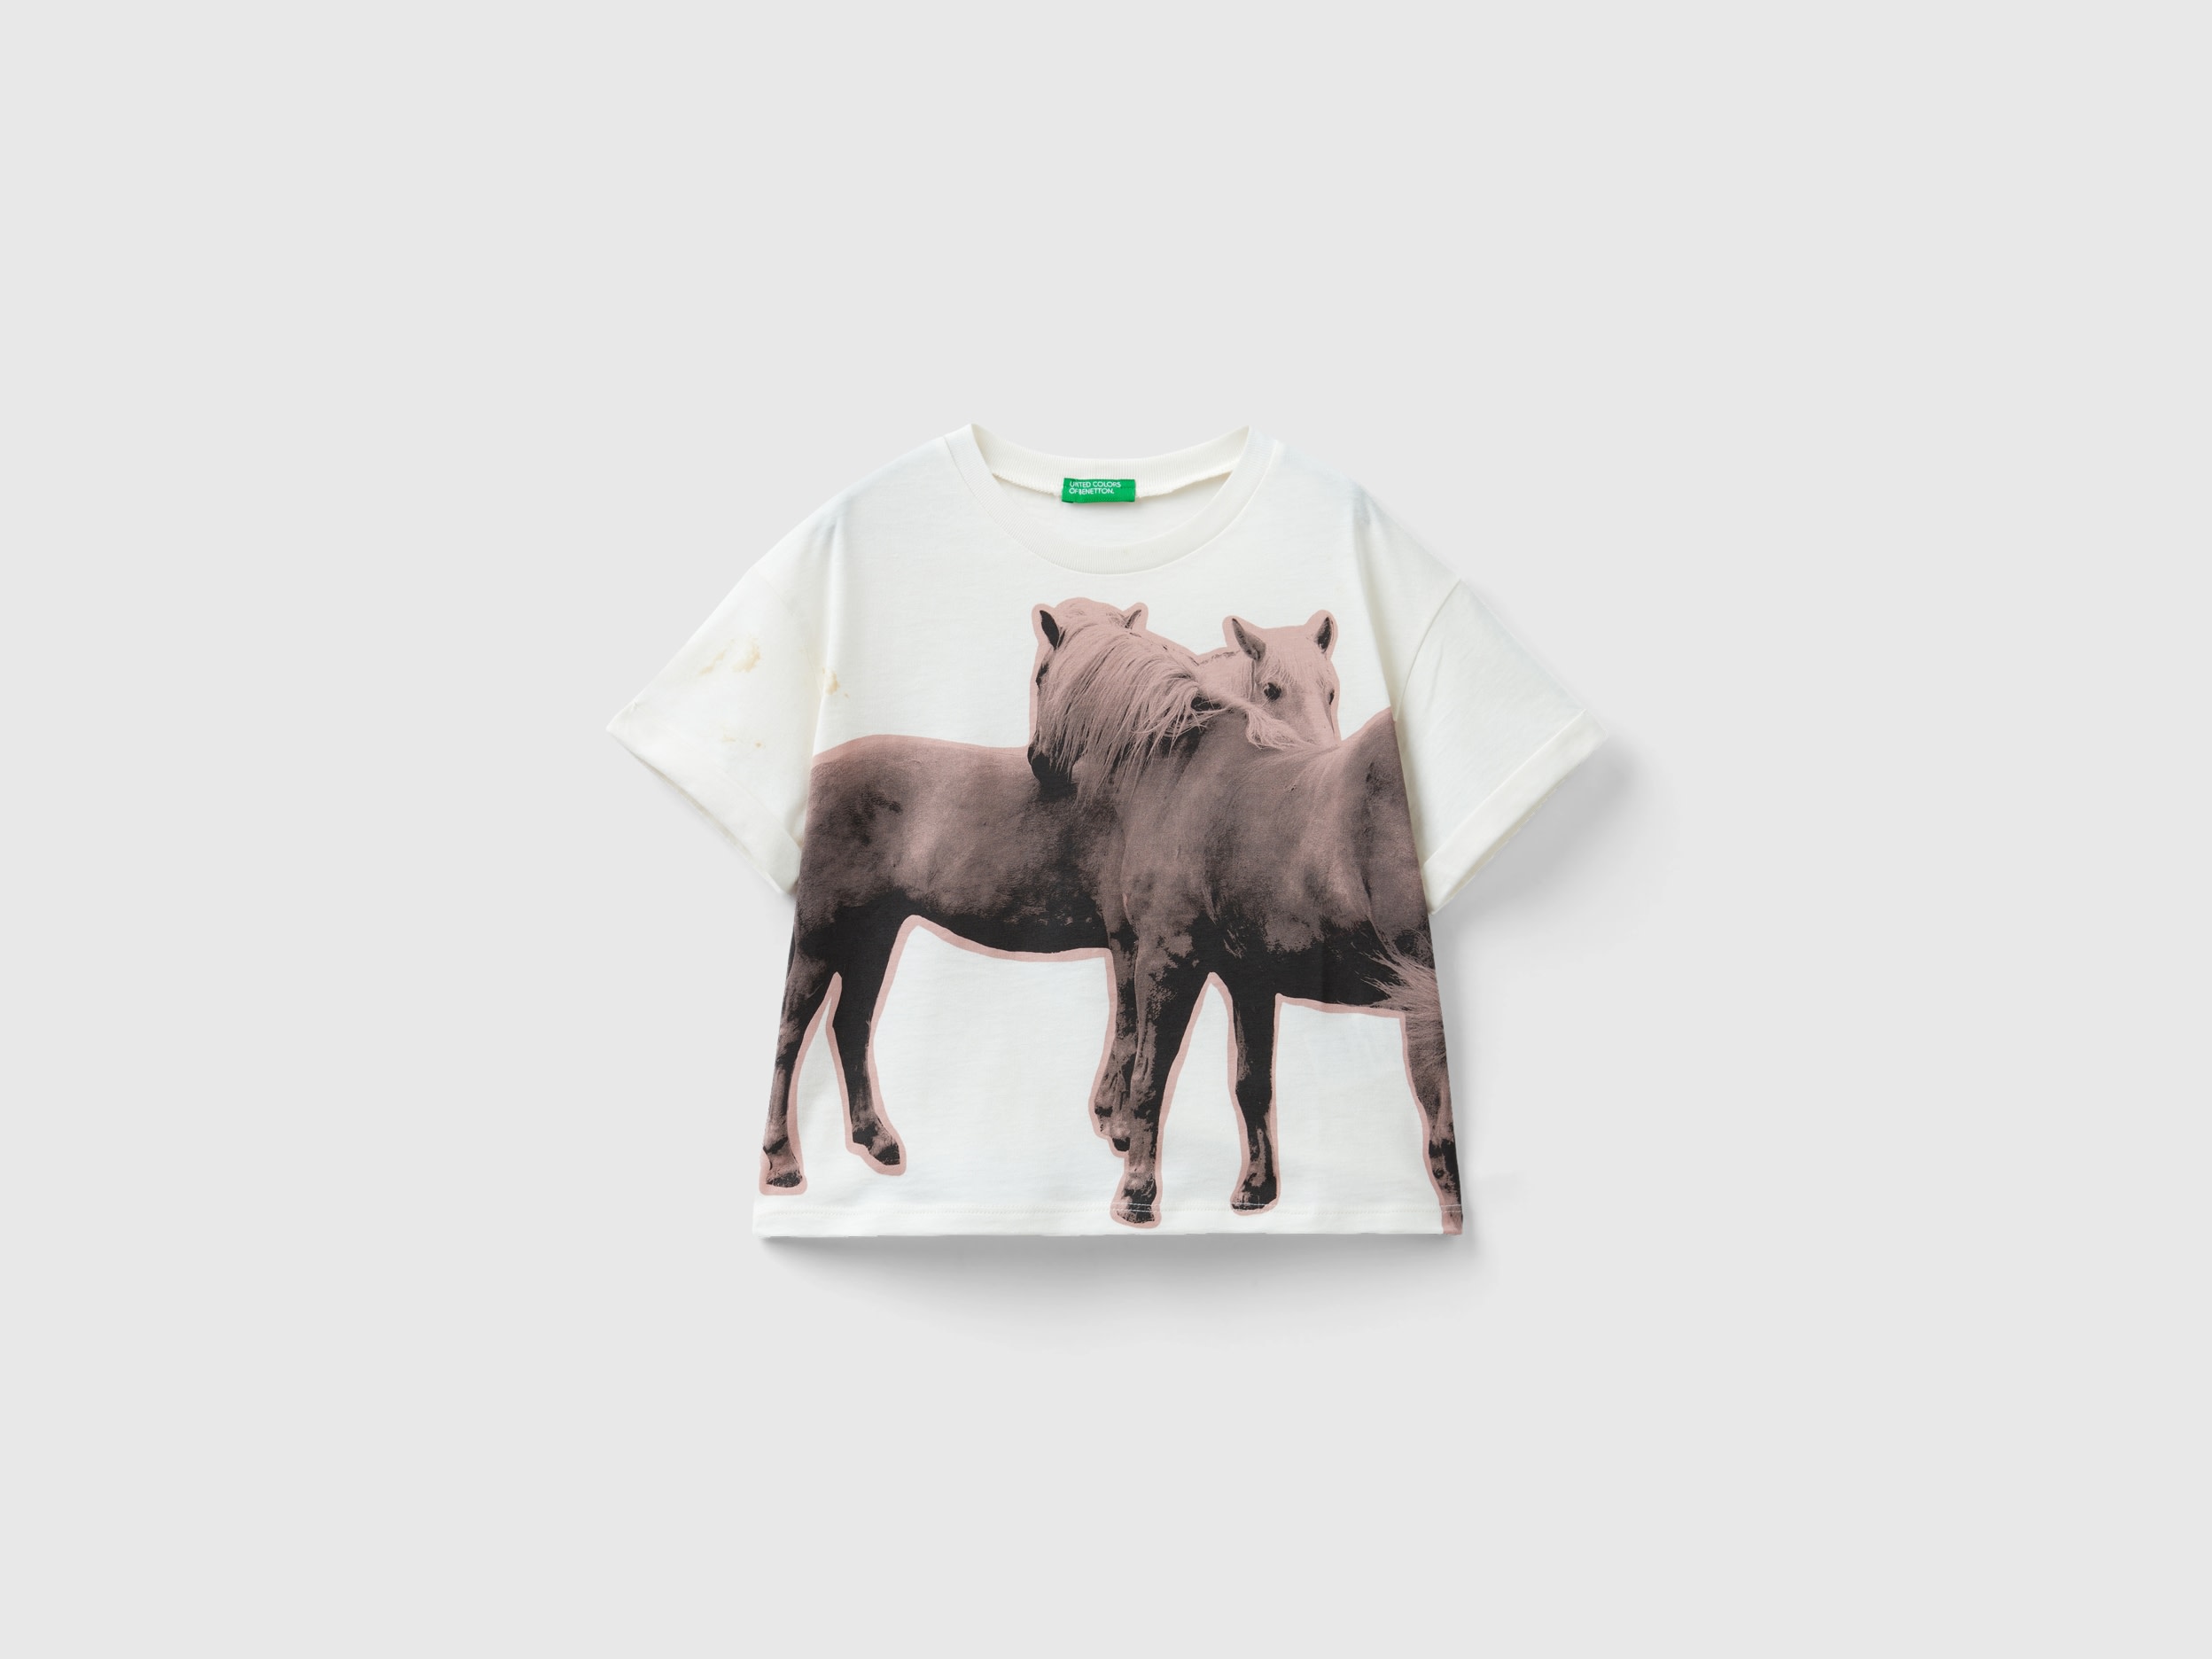 Image of Benetton, T-shirt With Photographic Horse Print, size 2XL, Creamy White, Kids